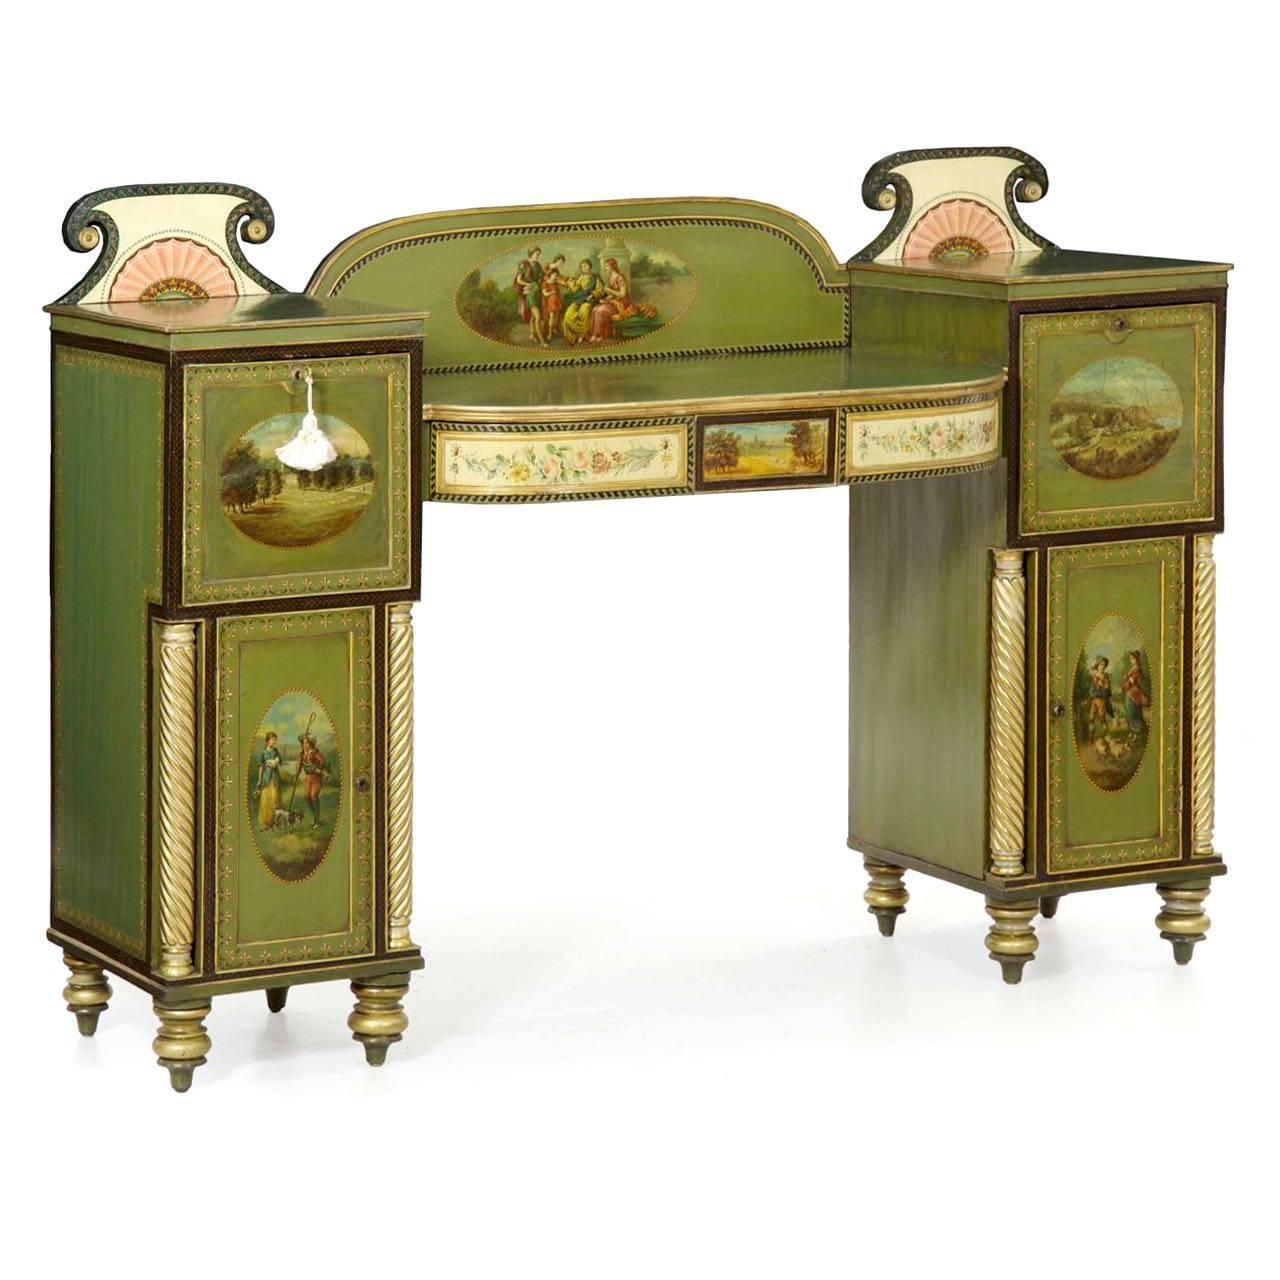 A striking pedestal sideboard with an overall green ground polychrome surface against gilded highlights, the sideboard is knock-down for easy and safe transport. The arched backdrop is enhanced with a large classical genre scene of figures